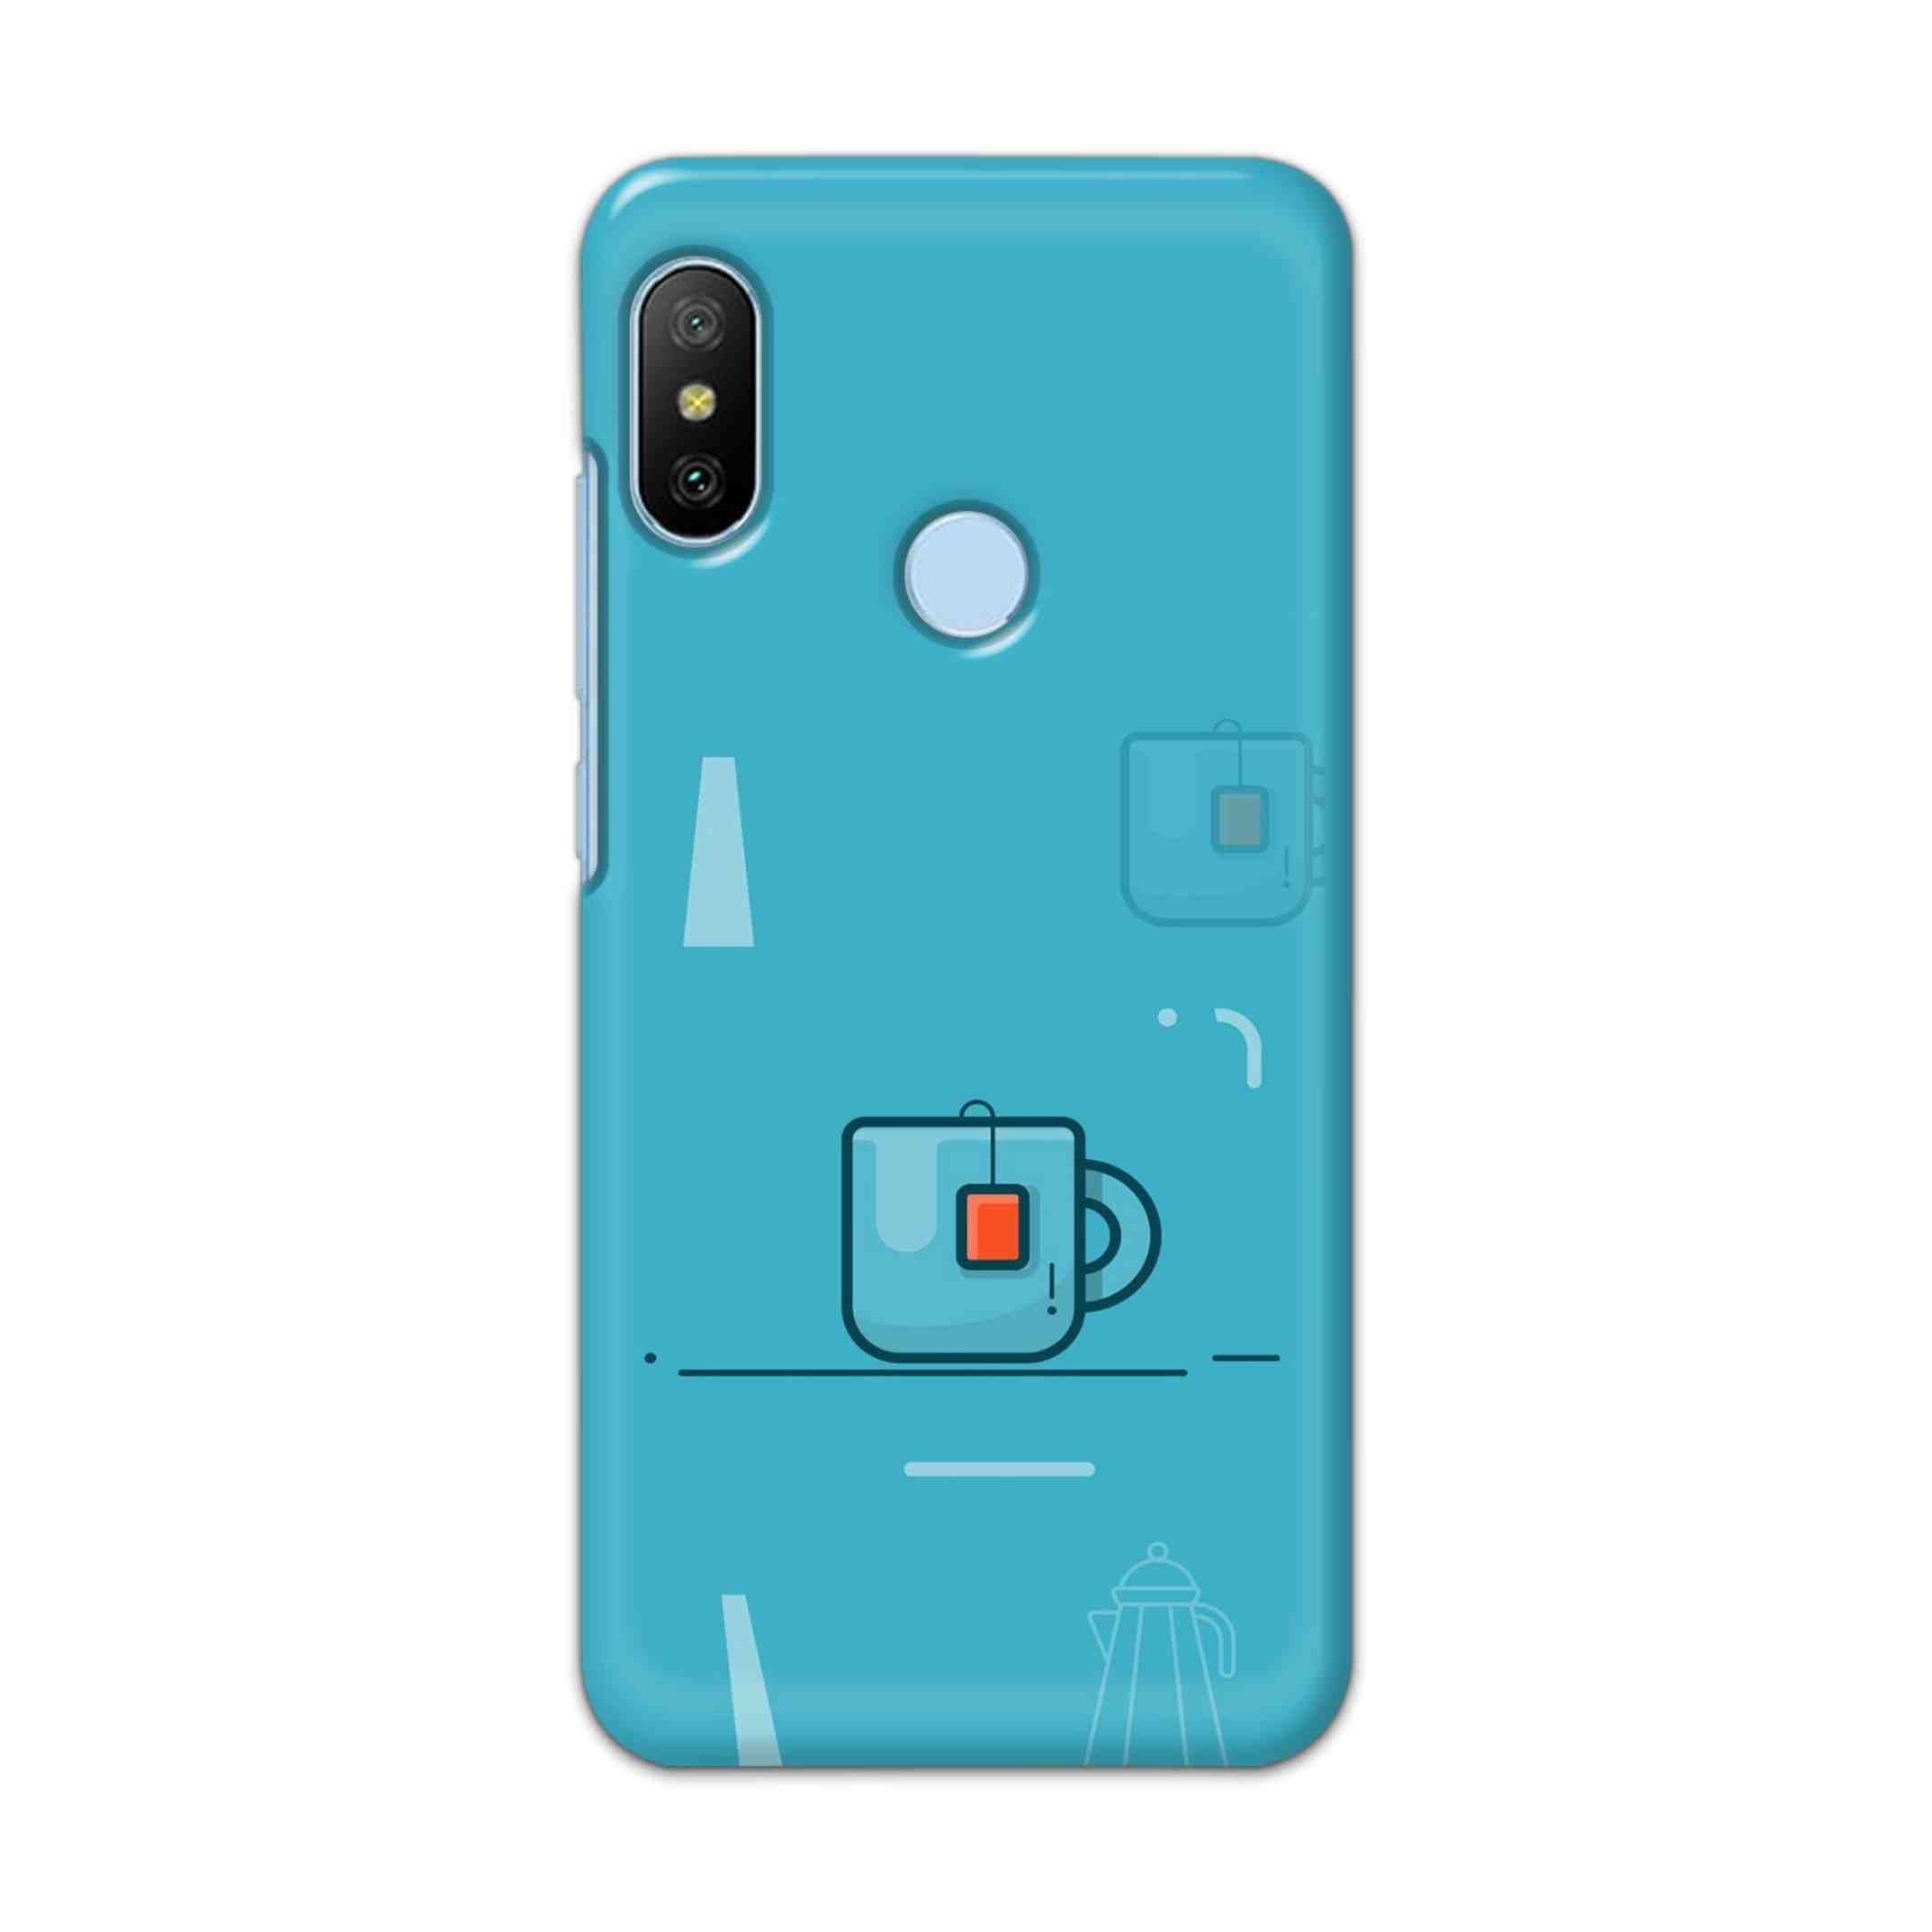 Buy Green Tea Hard Back Mobile Phone Case/Cover For Xiaomi Redmi 6 Pro Online